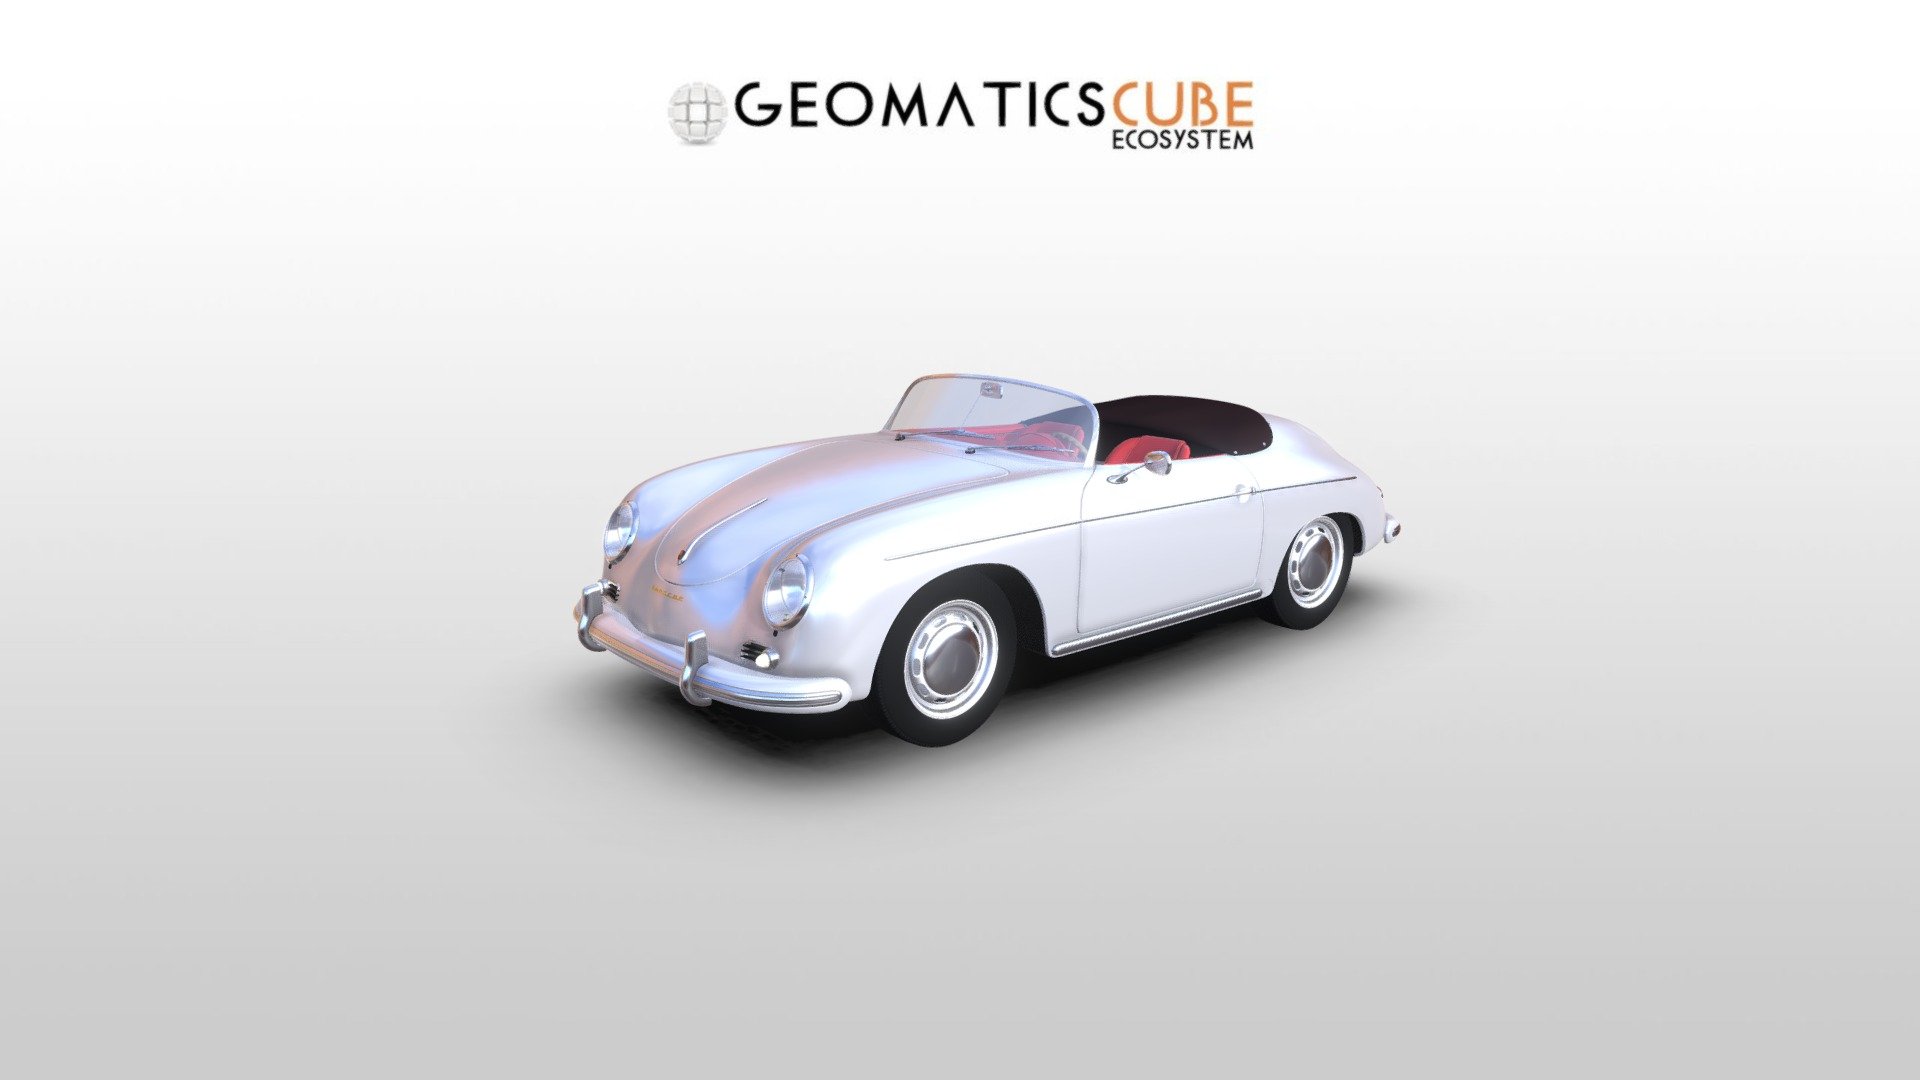 Integrated solution http://www.virtualgeo.eu/soluzione_integrata.php 
Ask for free cost estimate http://www.virtualgeo.eu/areaPreventivi/login.php?lang=eng 
ECH - Edutainment for Cultural Heritage http://www.virtualgeo.eu/eventi_culturali.php - Porsche 356 Speedster - 3D model by Virtualgeo s.r.l. (@virtualgeo) 3d model